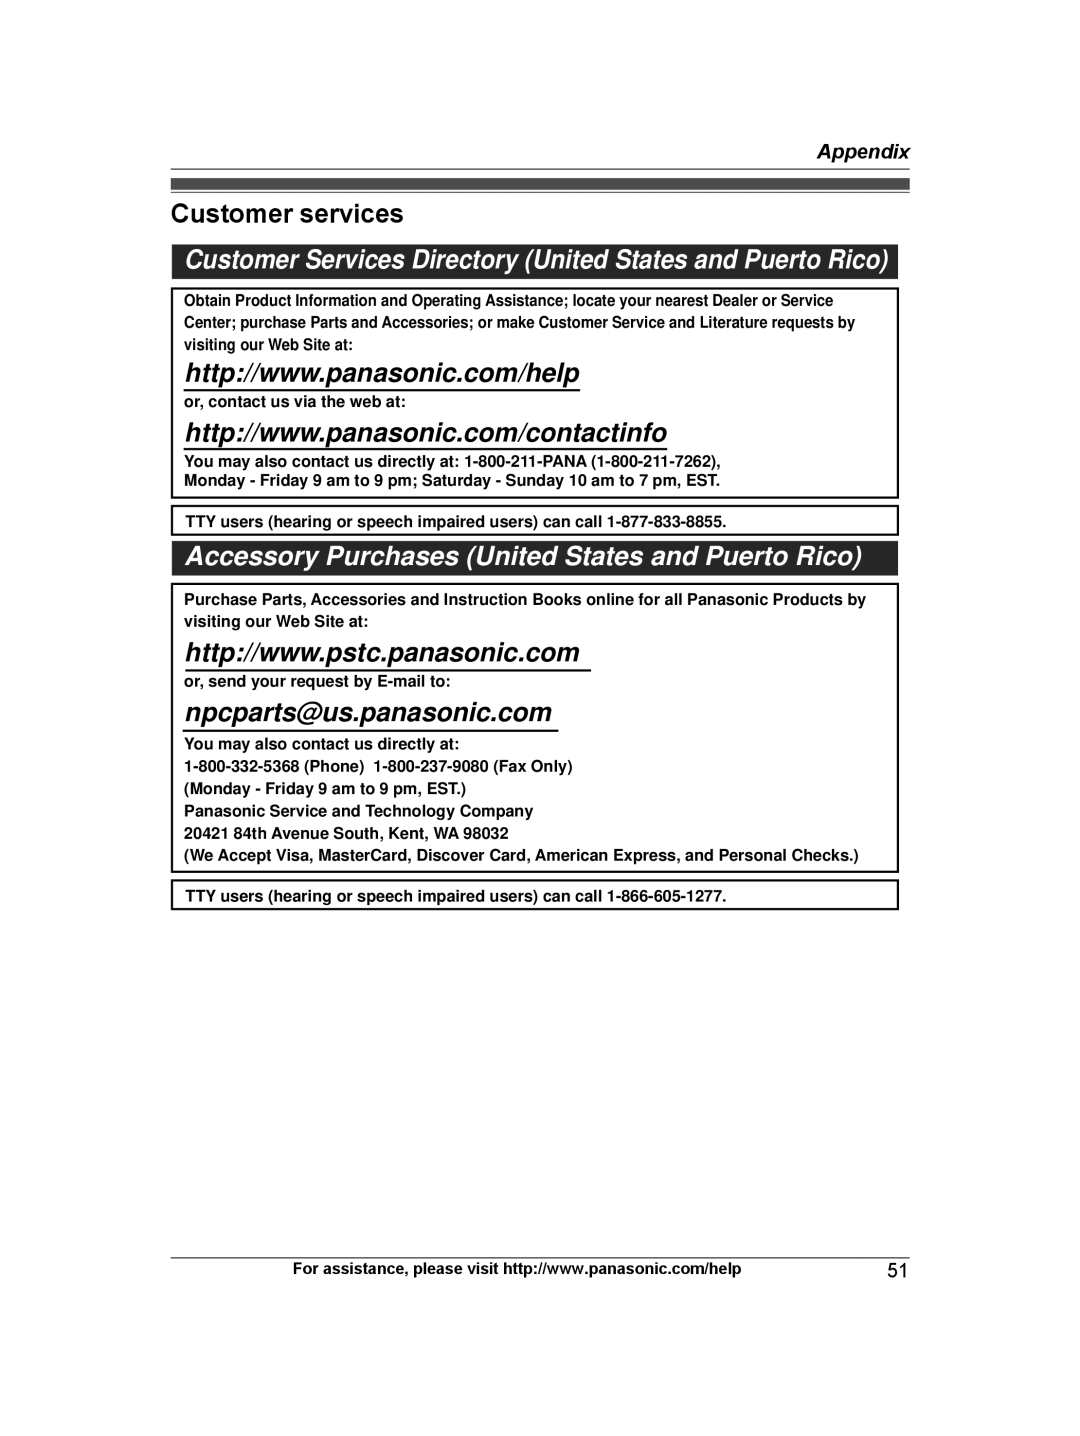 Panasonic KX-TG6672B, KX-TG6671 Customer services, Appendix, Customer Services Directory United States and Puerto Rico 